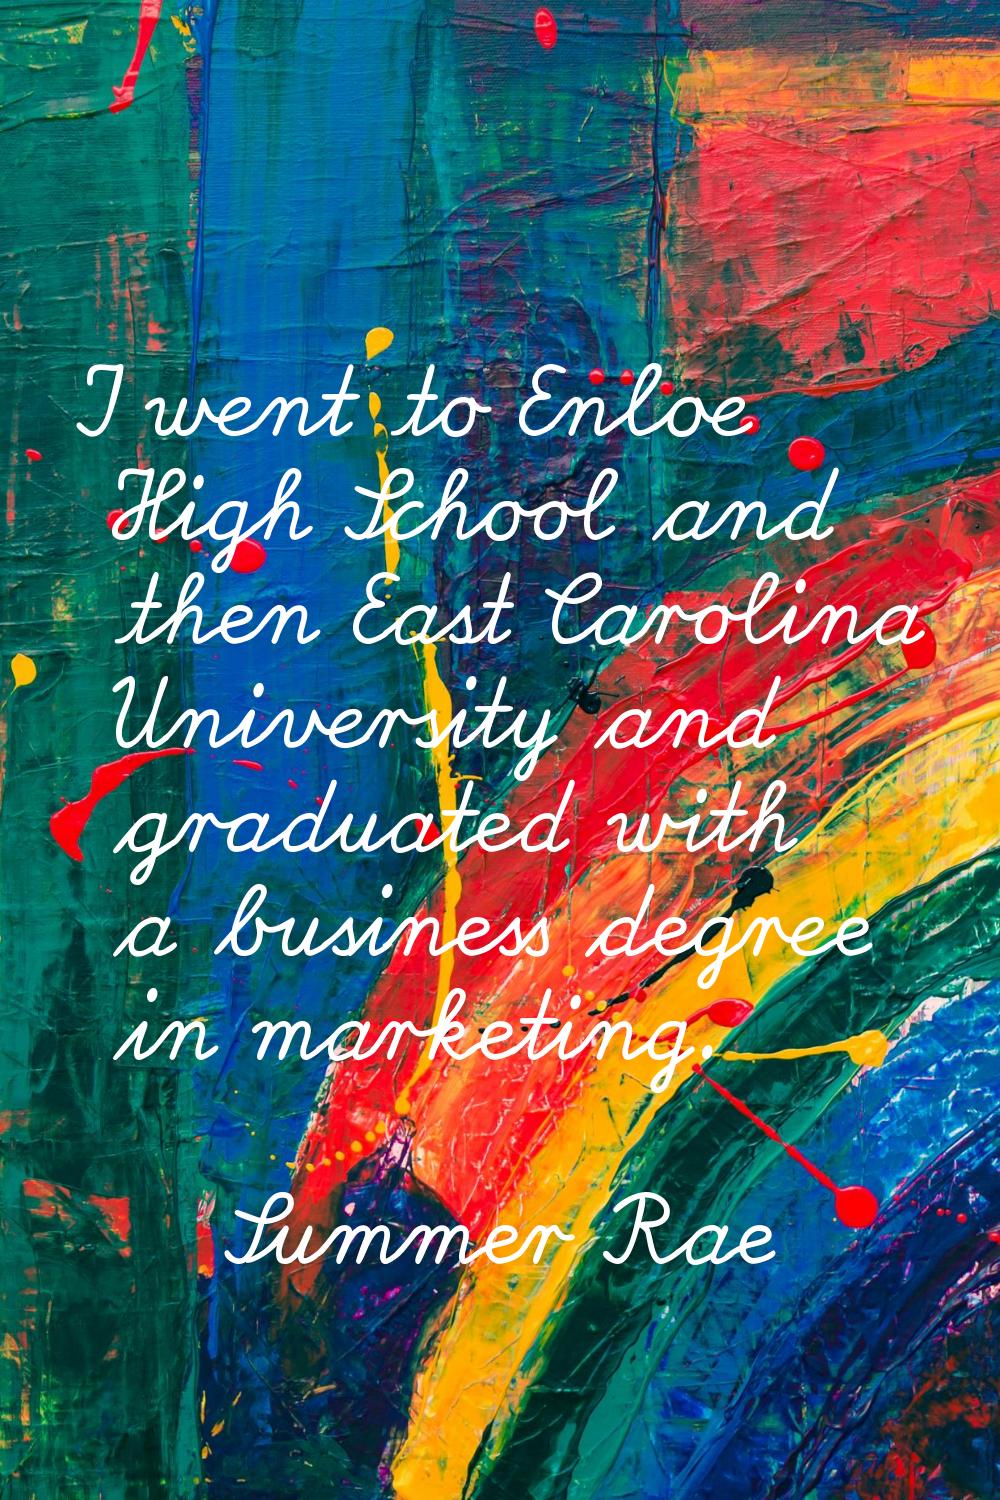 I went to Enloe High School and then East Carolina University and graduated with a business degree 